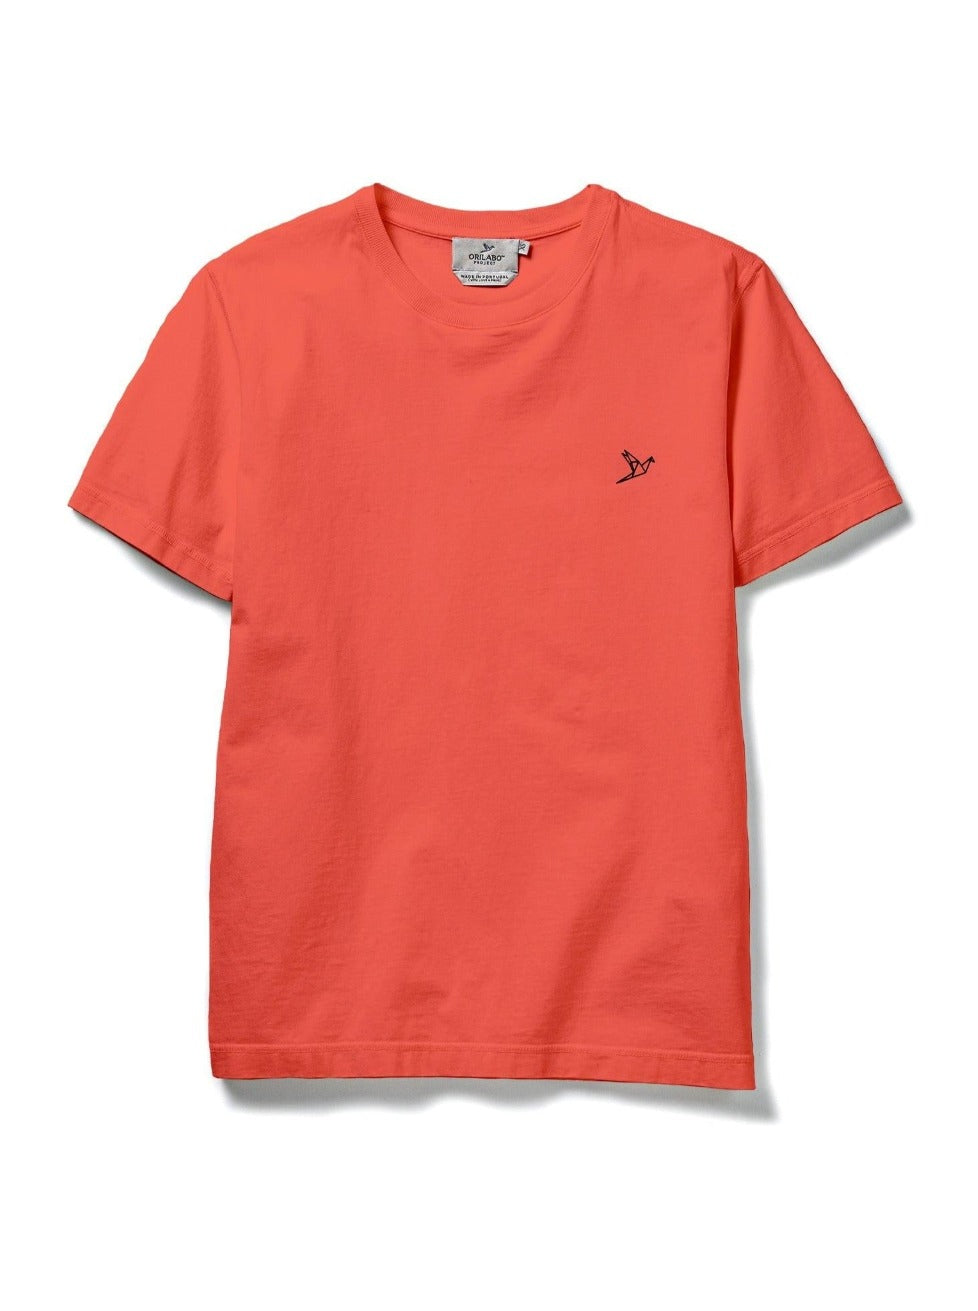 Women's Small Logo T-shirt - Coral - ORILABO Project